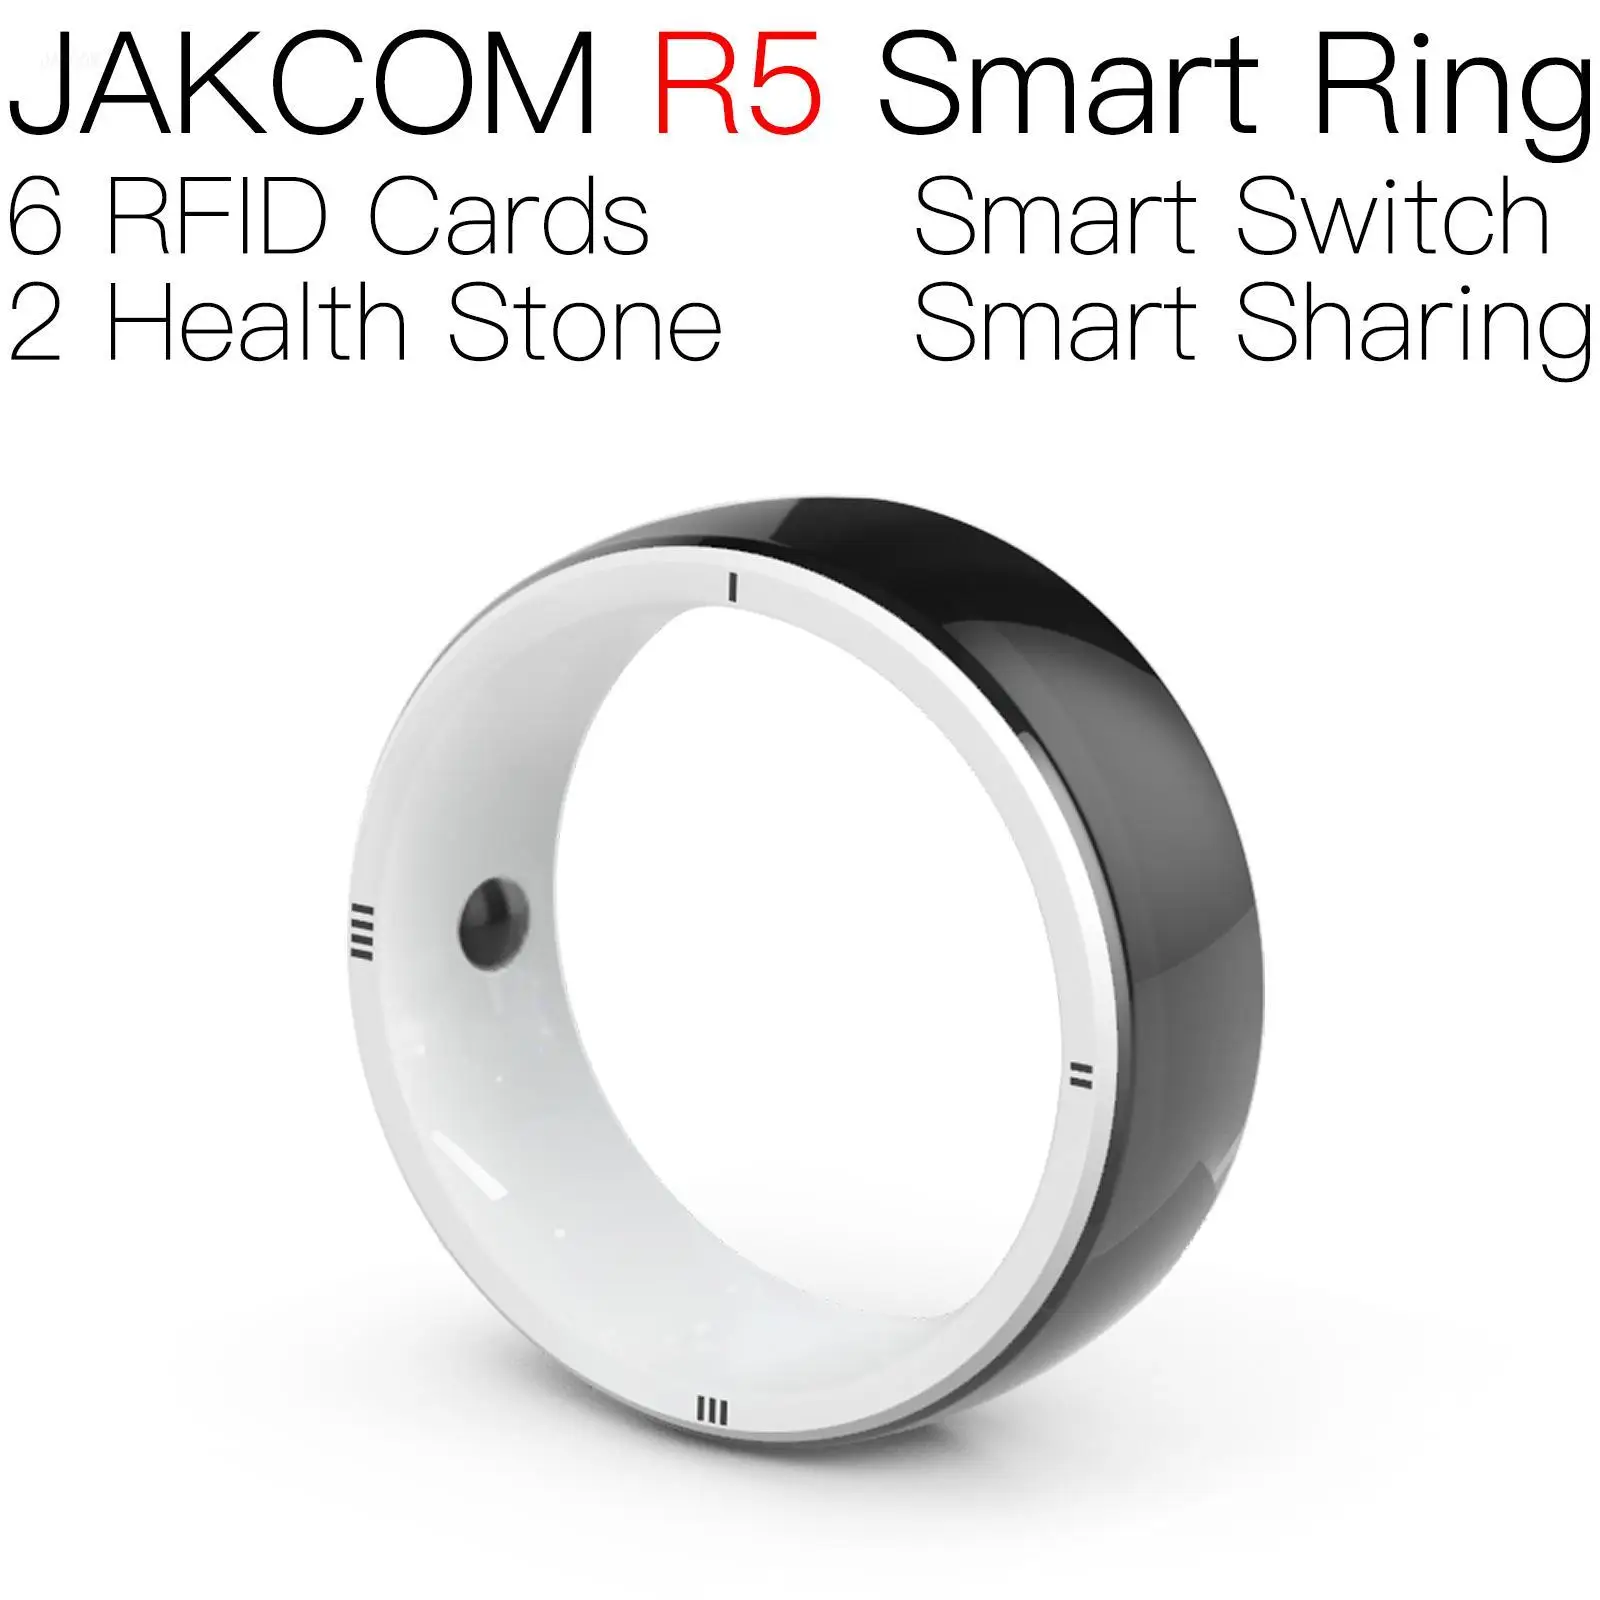 

JAKCOM R5 Smart Ring Best gift with rfid covers for credit cards gp uhf tag 125khz cat key license carding hbo max 1